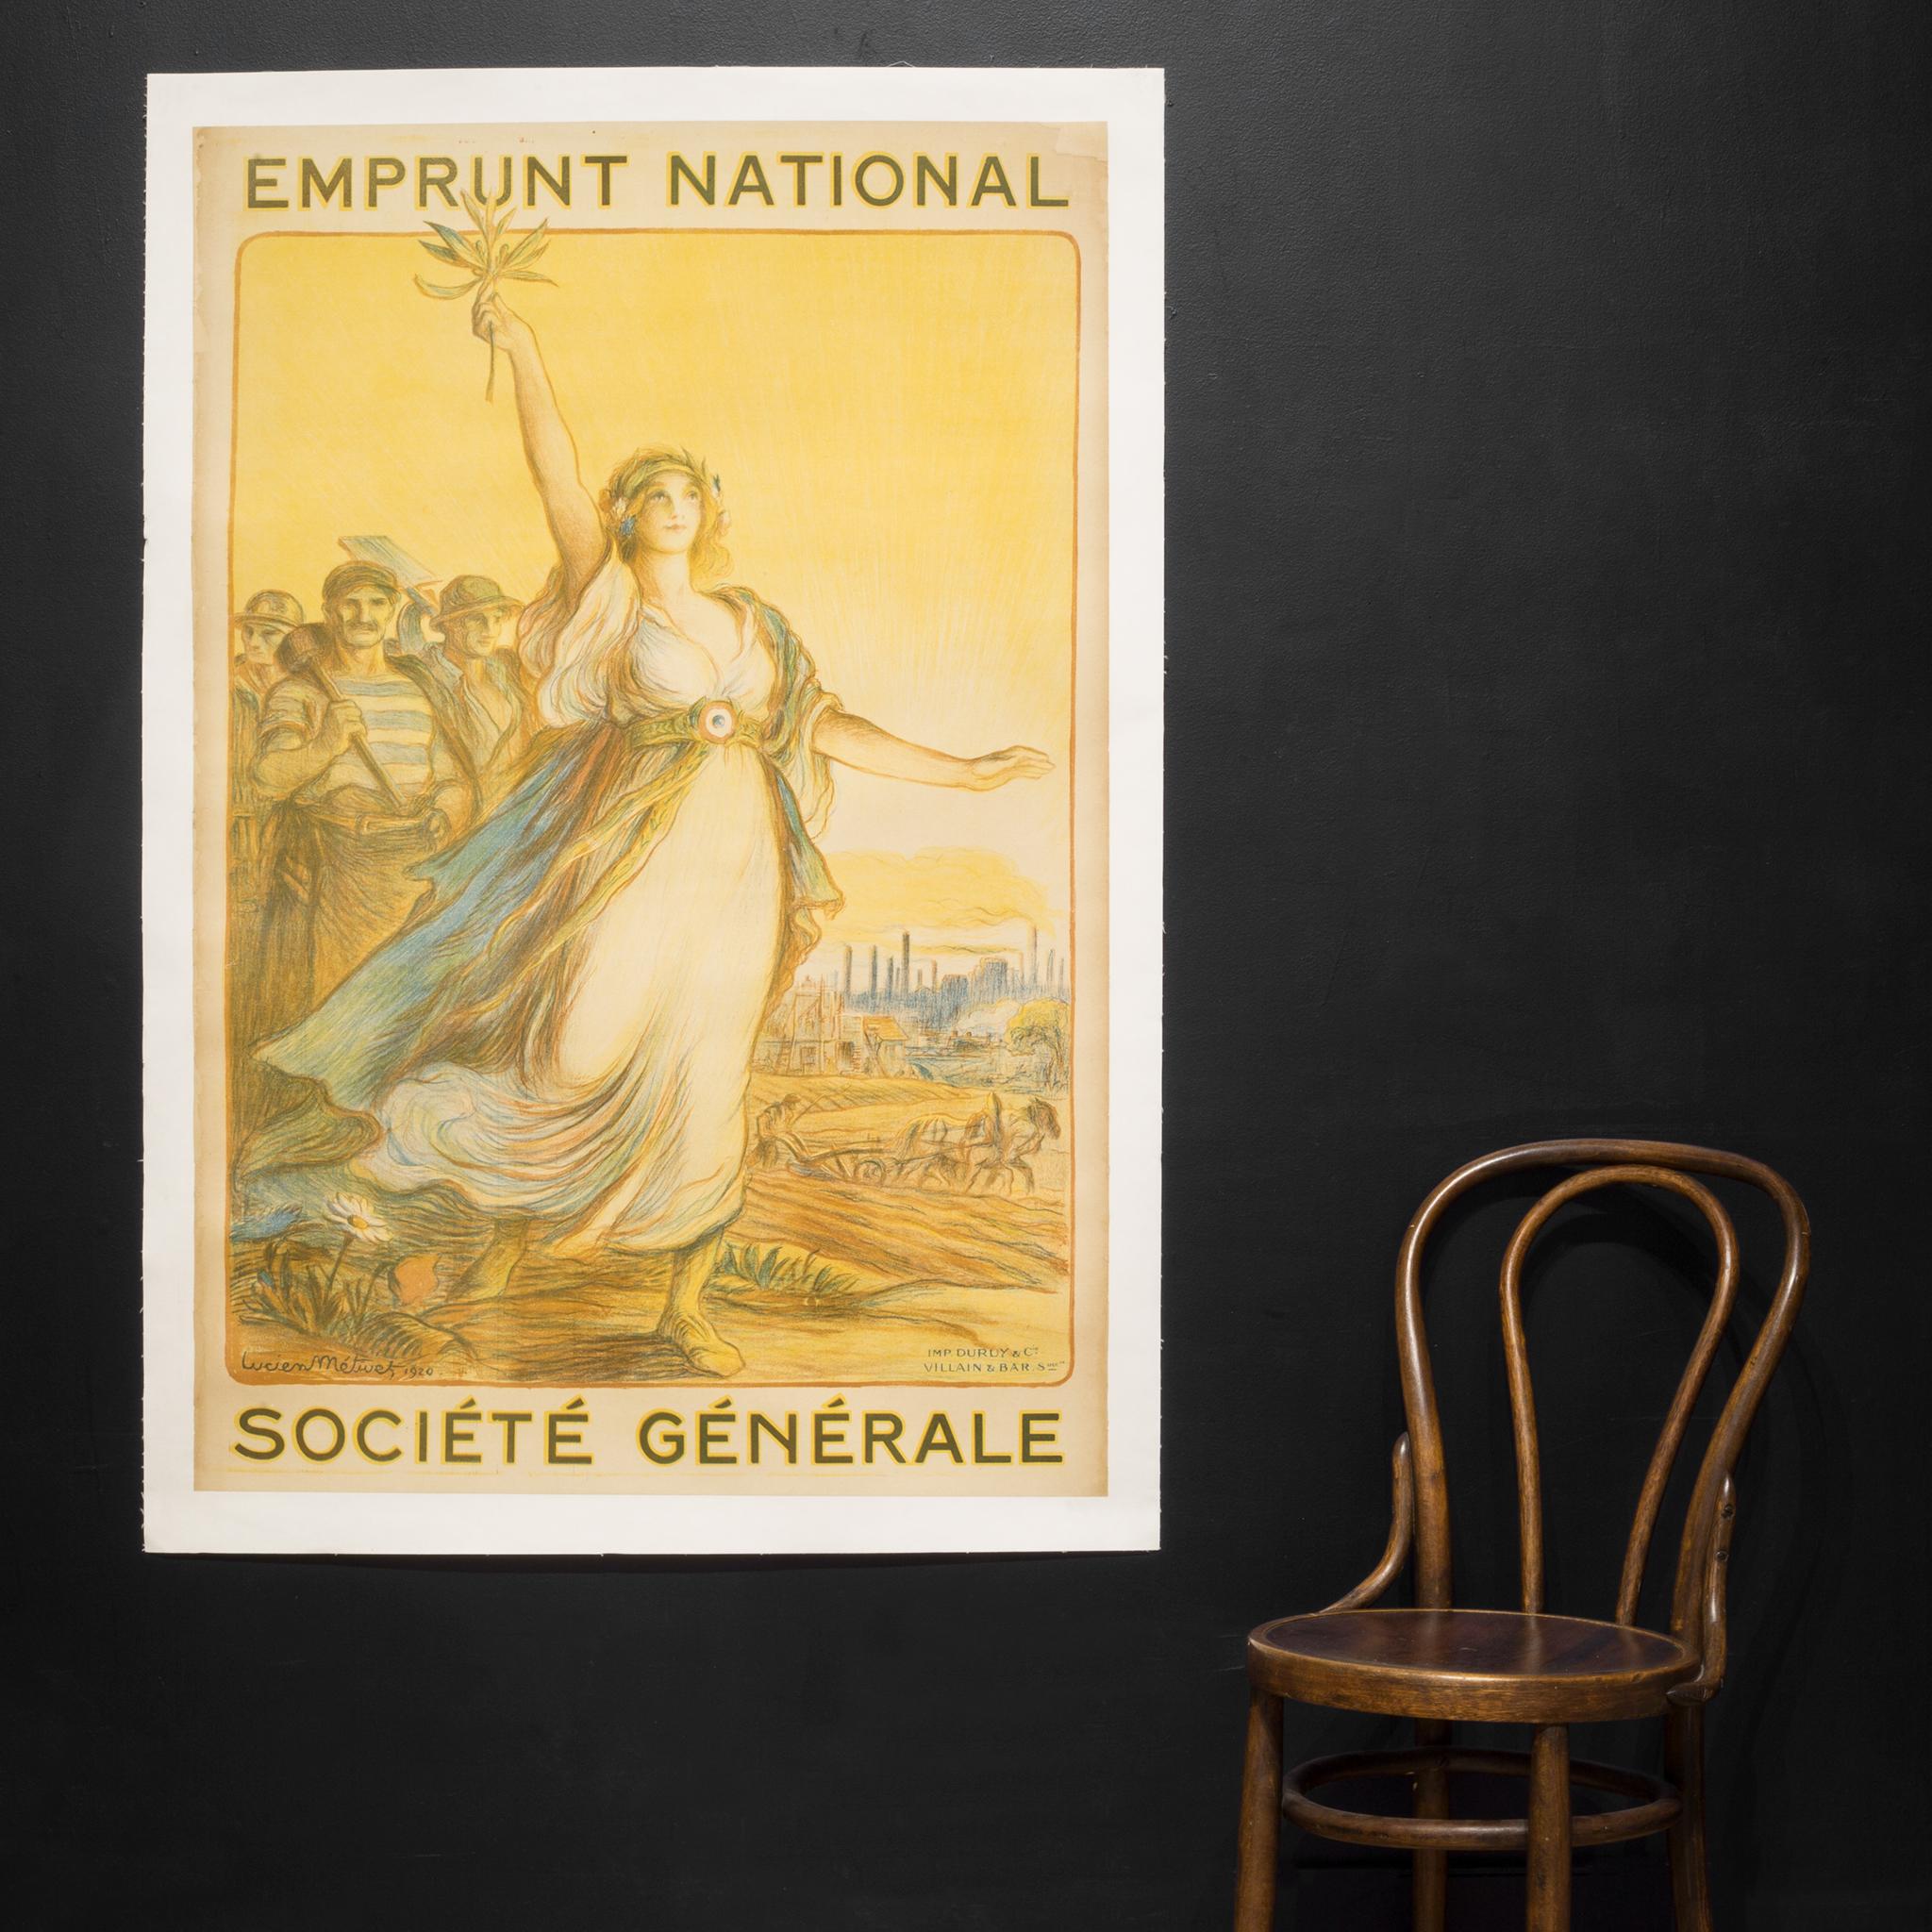 About

Original poster. Color lithograph. A French poster advertising the National Loan of 1920. In this poster the figure of victory, with a belt clasp in the form of a French roundel, holds an olive branch above her head and is leading a group